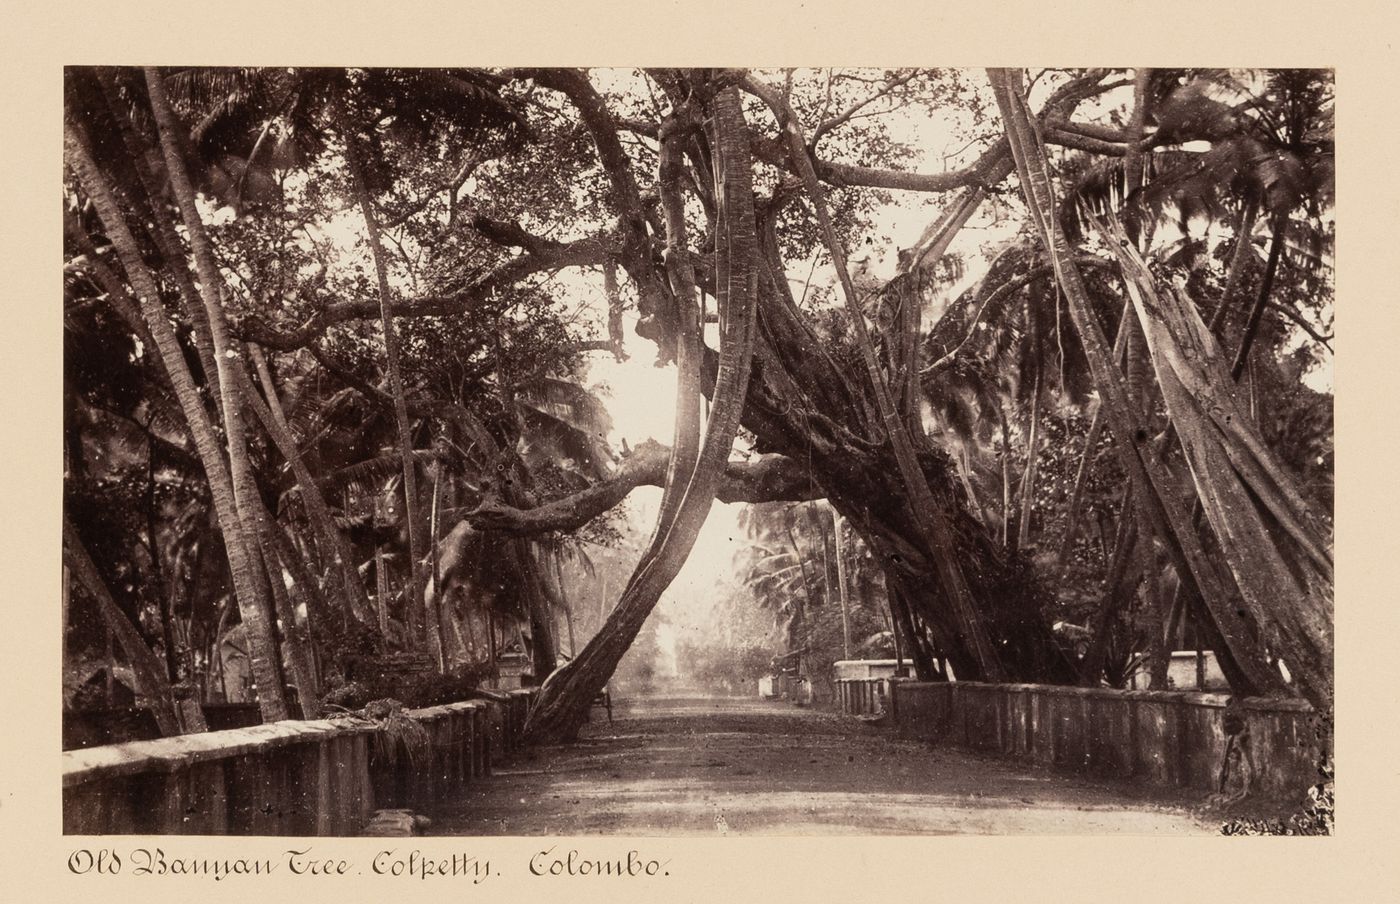 View of a street and an old banyan tree surrounded by other trees, Colombo, Ceylon (now Sri Lanka)